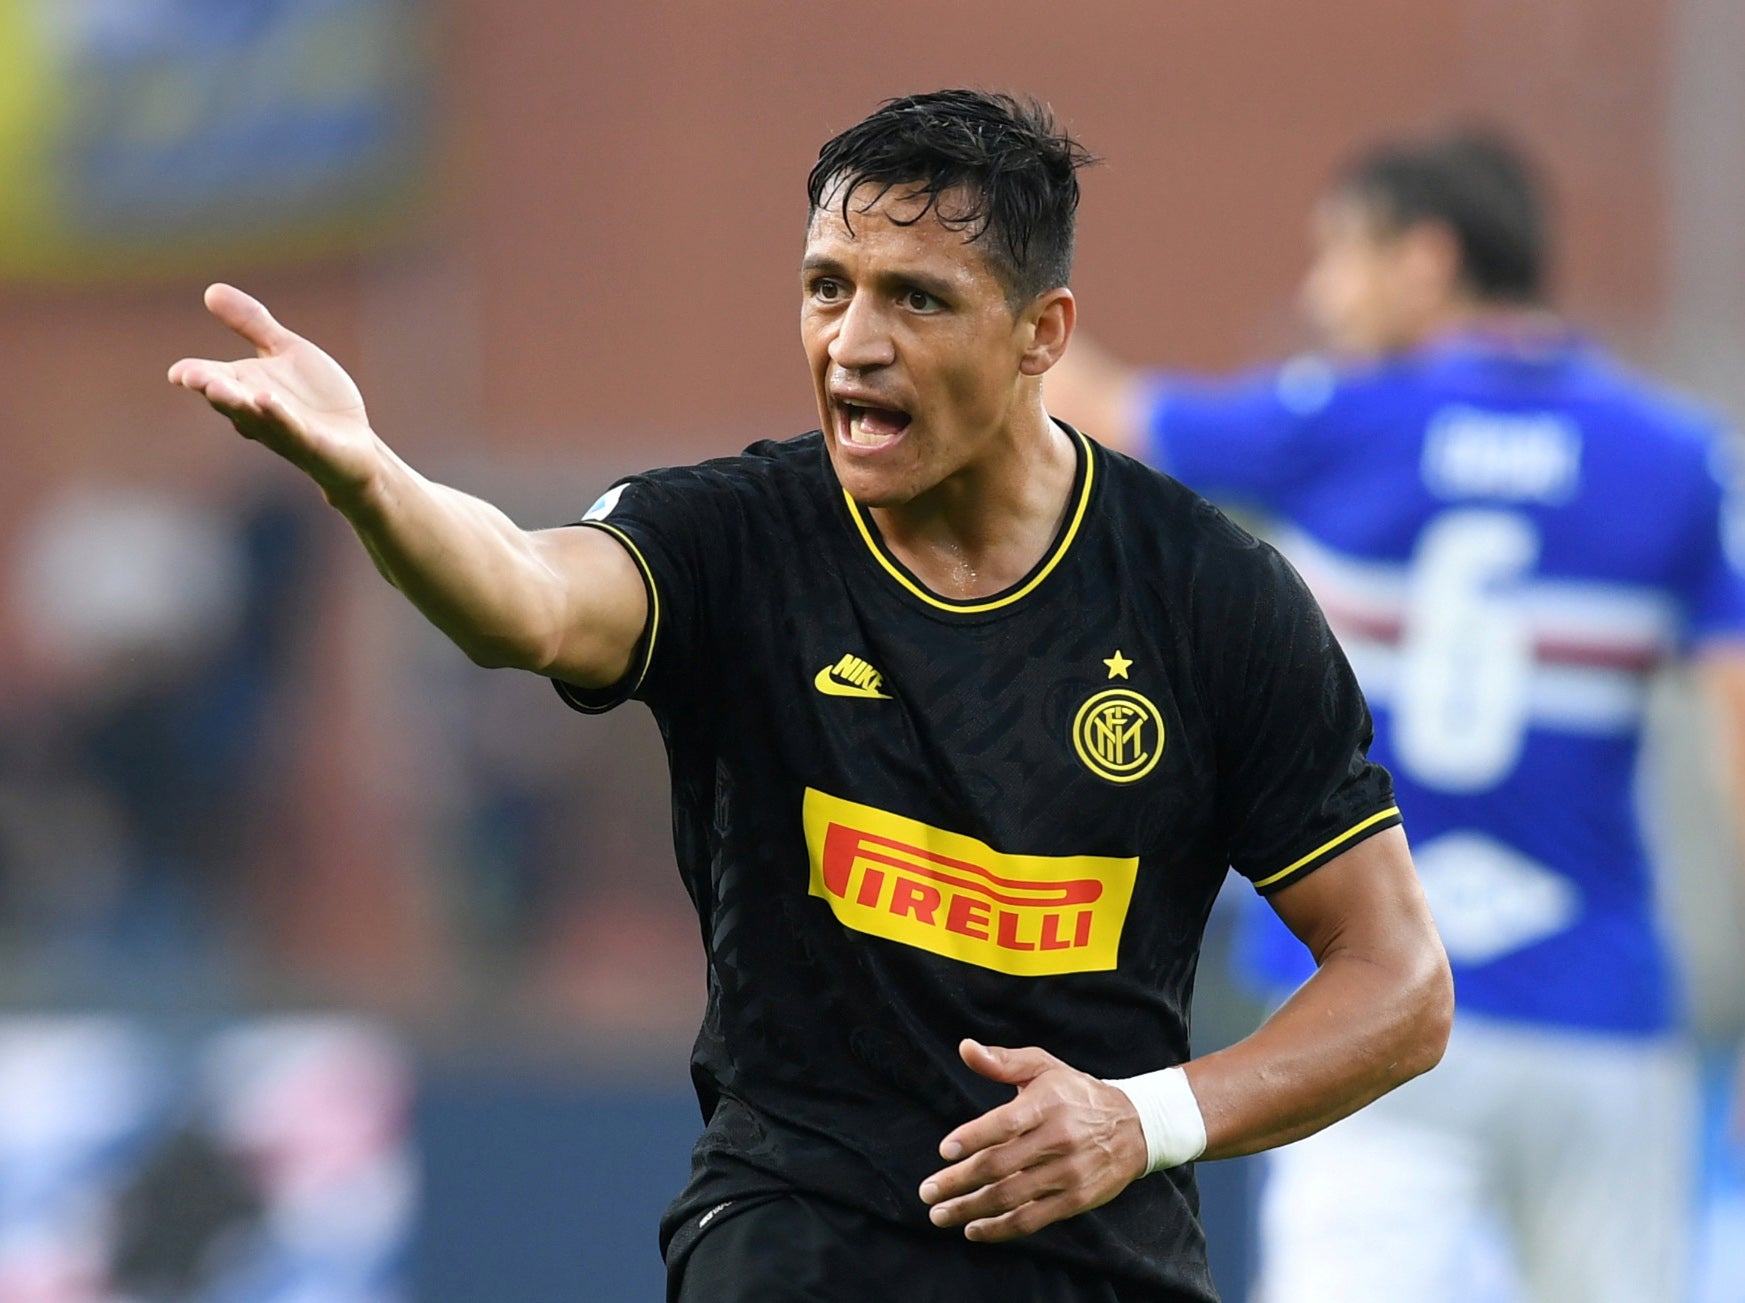 The news will come as a blow to Inter Milan, who acquired Sanchez’s services in the summer